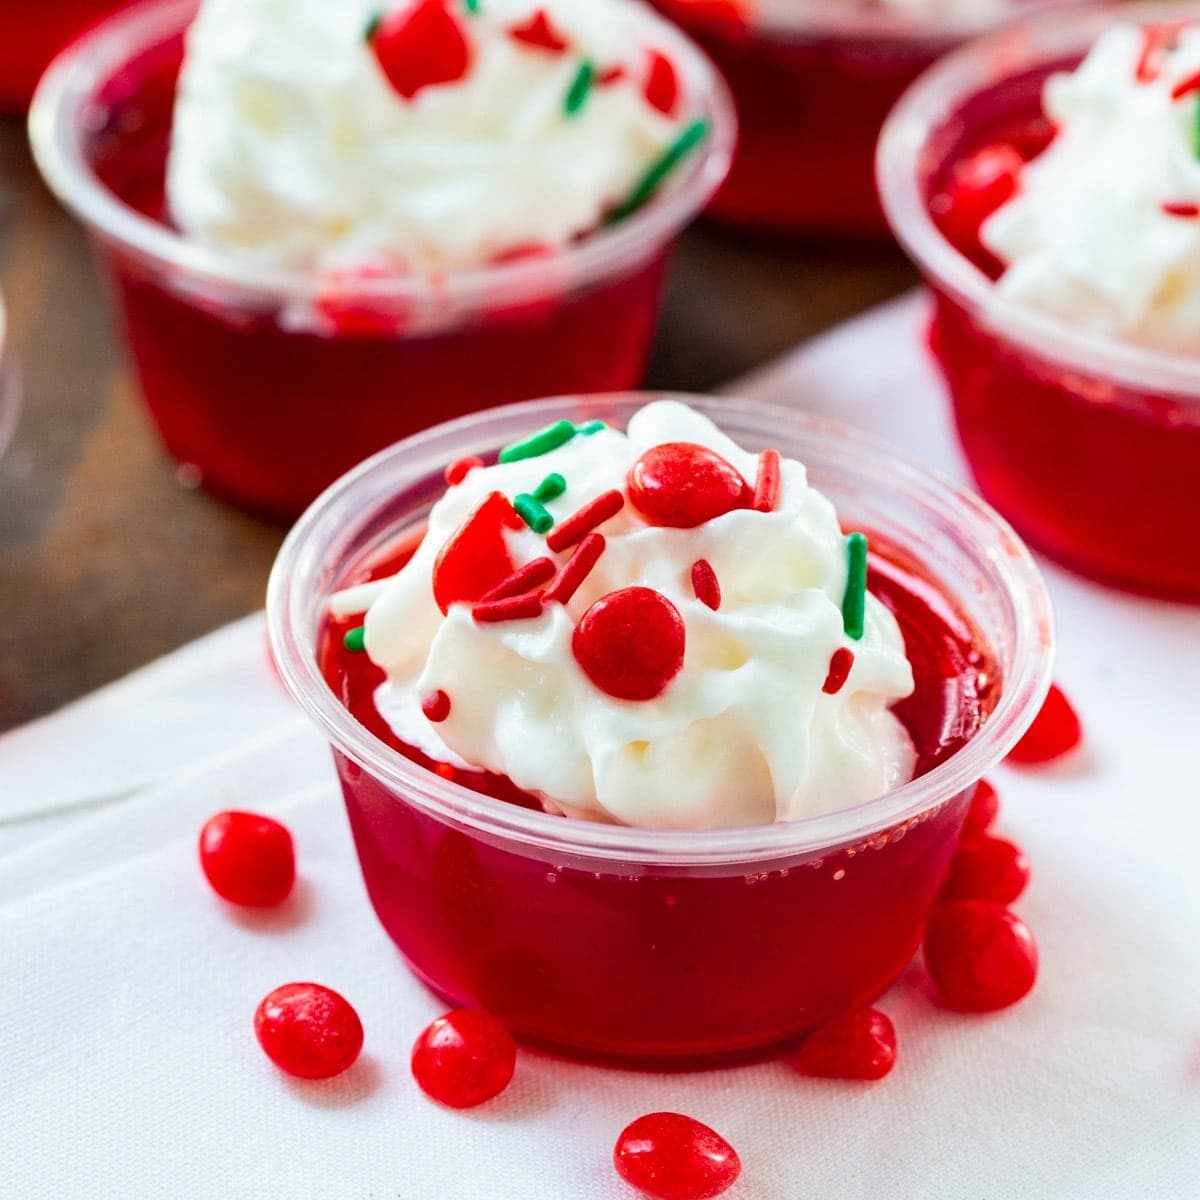 Fireball Jello shots on plastic cups topped with whipped cream and fresh cranberries garnish.